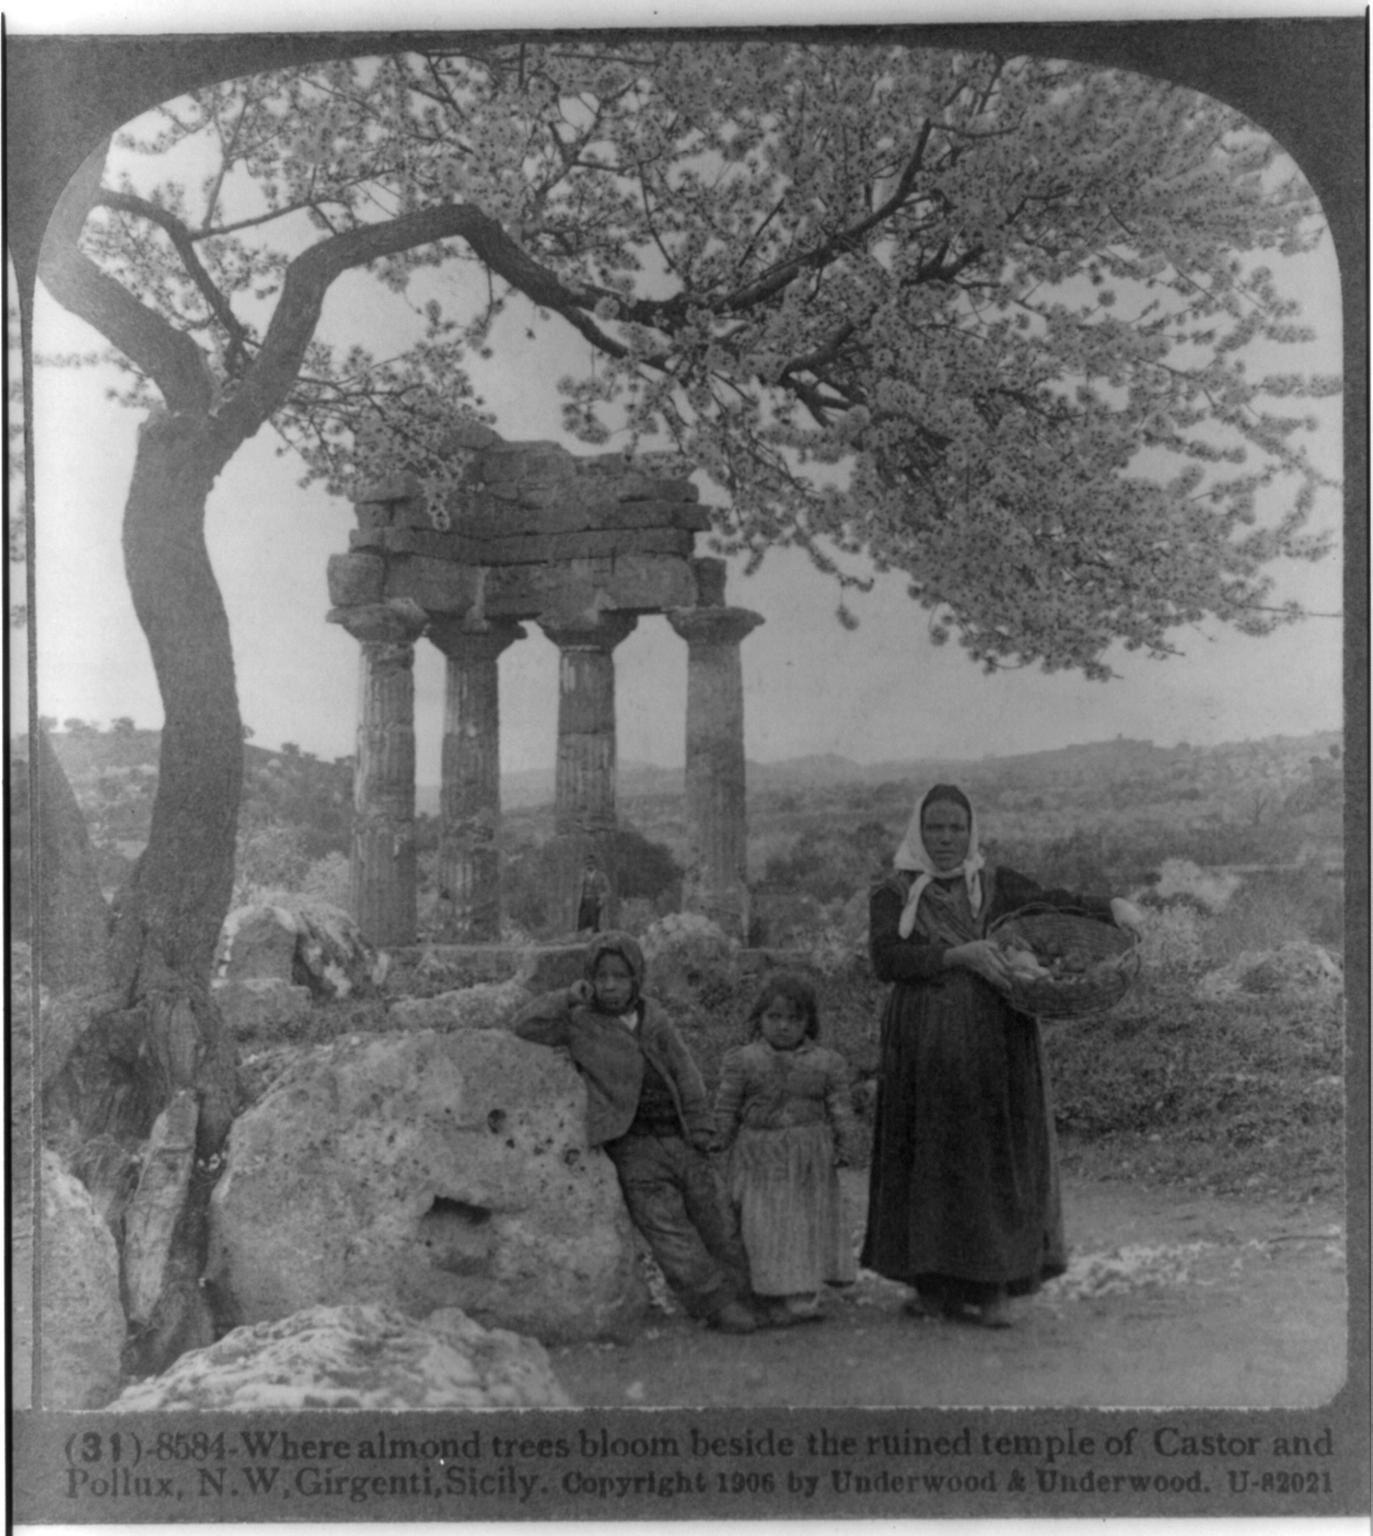 photograph - 318584Where almond trees bloom beside the ruined temple of Castor and Pollux. N.W.Girgenti, Sicily. Copyright 1906 by Underwood & Underwood. U82021